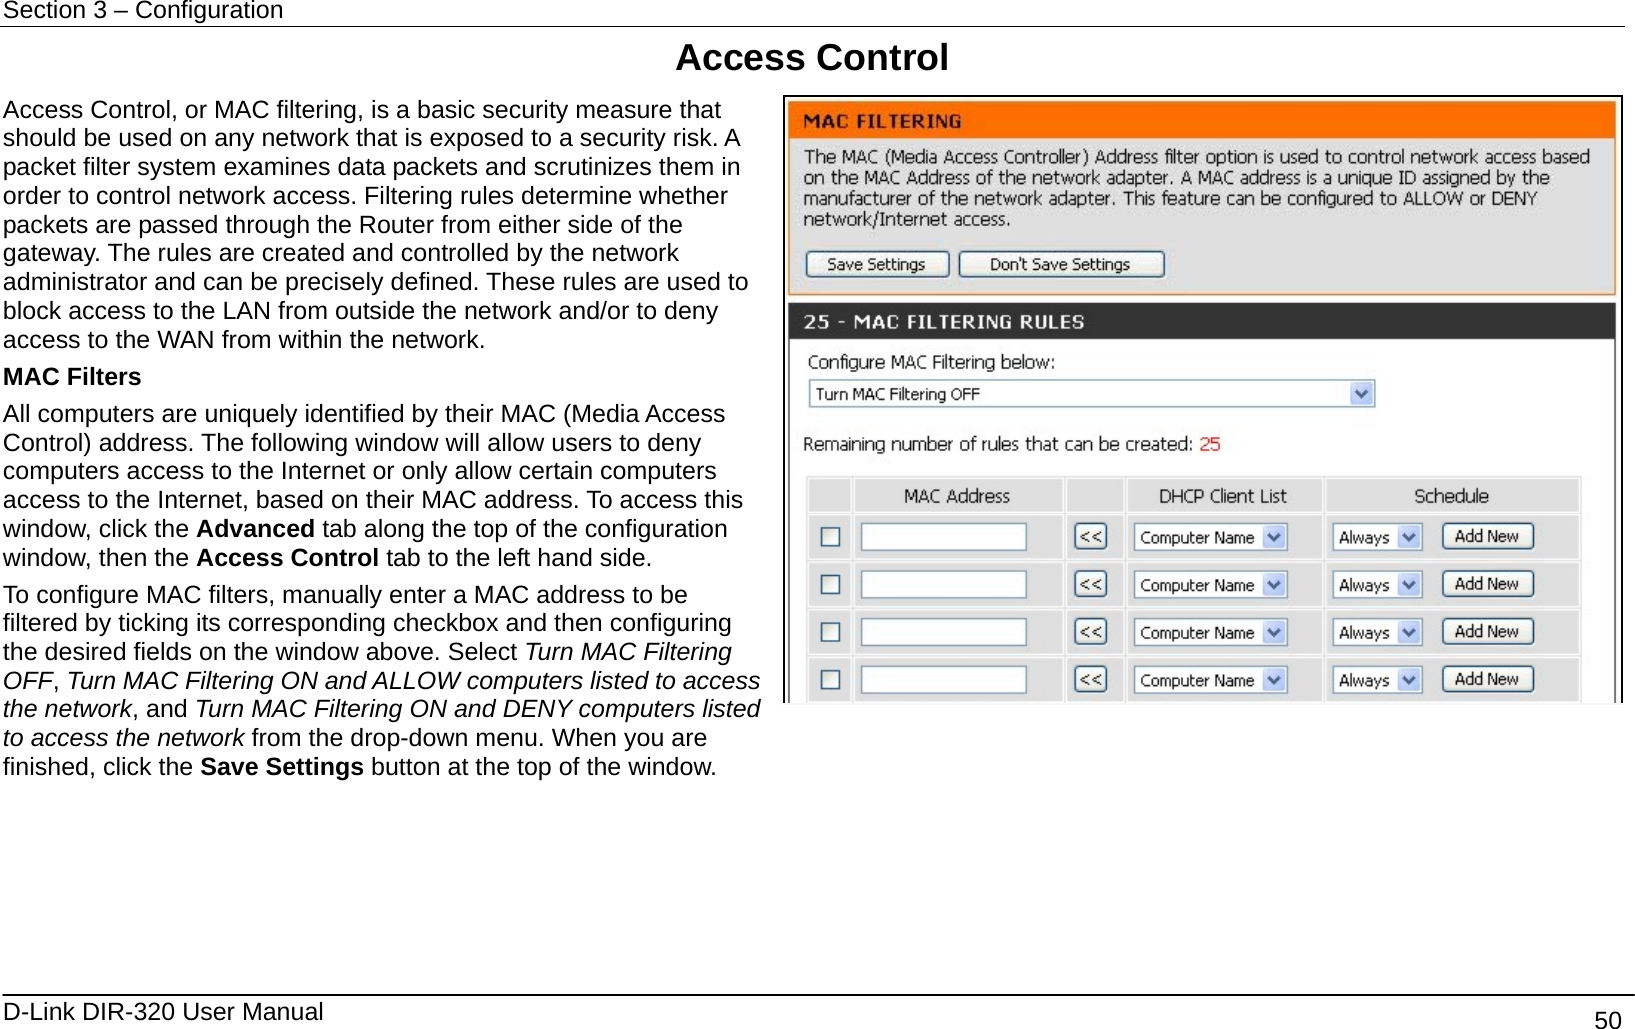 Section 3 – Configuration   D-Link DIR-320 User Manual                                       50 Access Control Access Control, or MAC filtering, is a basic security measure that should be used on any network that is exposed to a security risk. A packet filter system examines data packets and scrutinizes them in order to control network access. Filtering rules determine whether packets are passed through the Router from either side of the gateway. The rules are created and controlled by the network administrator and can be precisely defined. These rules are used to block access to the LAN from outside the network and/or to deny access to the WAN from within the network. MAC Filters All computers are uniquely identified by their MAC (Media Access Control) address. The following window will allow users to deny computers access to the Internet or only allow certain computers access to the Internet, based on their MAC address. To access this window, click the Advanced tab along the top of the configuration window, then the Access Control tab to the left hand side. To configure MAC filters, manually enter a MAC address to be filtered by ticking its corresponding checkbox and then configuring the desired fields on the window above. Select Turn MAC Filtering OFF, Turn MAC Filtering ON and ALLOW computers listed to access the network, and Turn MAC Filtering ON and DENY computers listed to access the network from the drop-down menu. When you are finished, click the Save Settings button at the top of the window.        